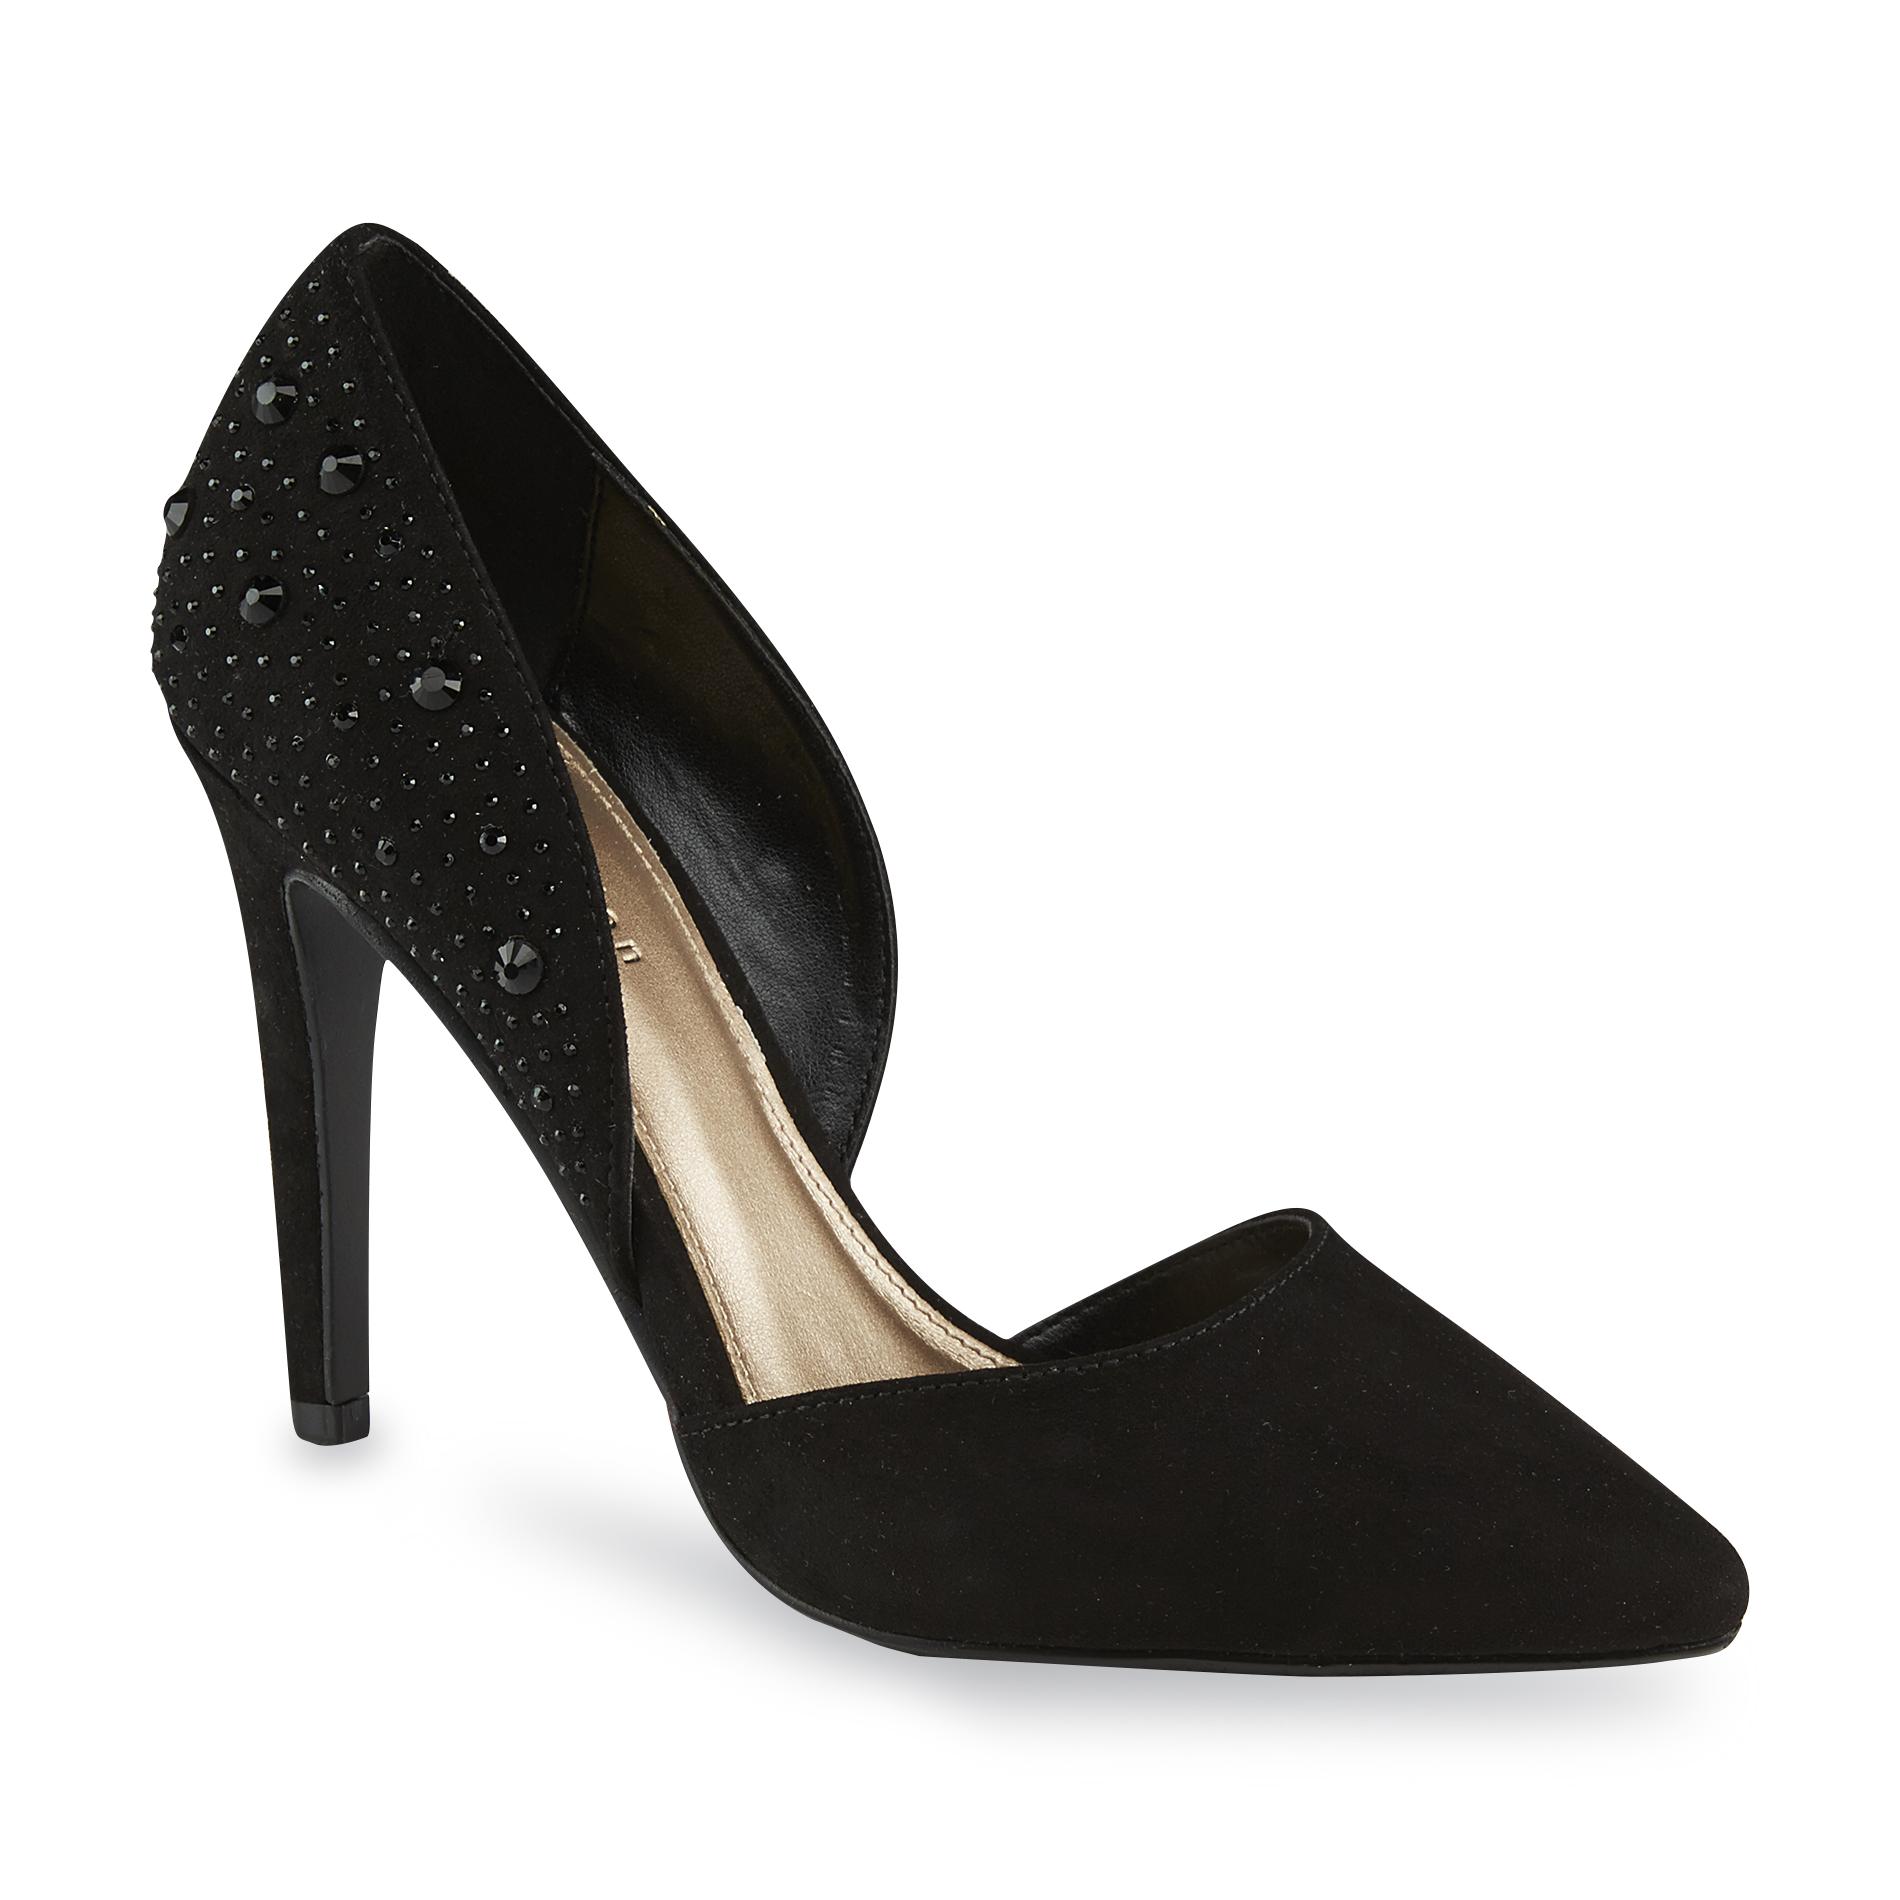 Attention Women's Dillon Black Embellished D'Orsay Pump